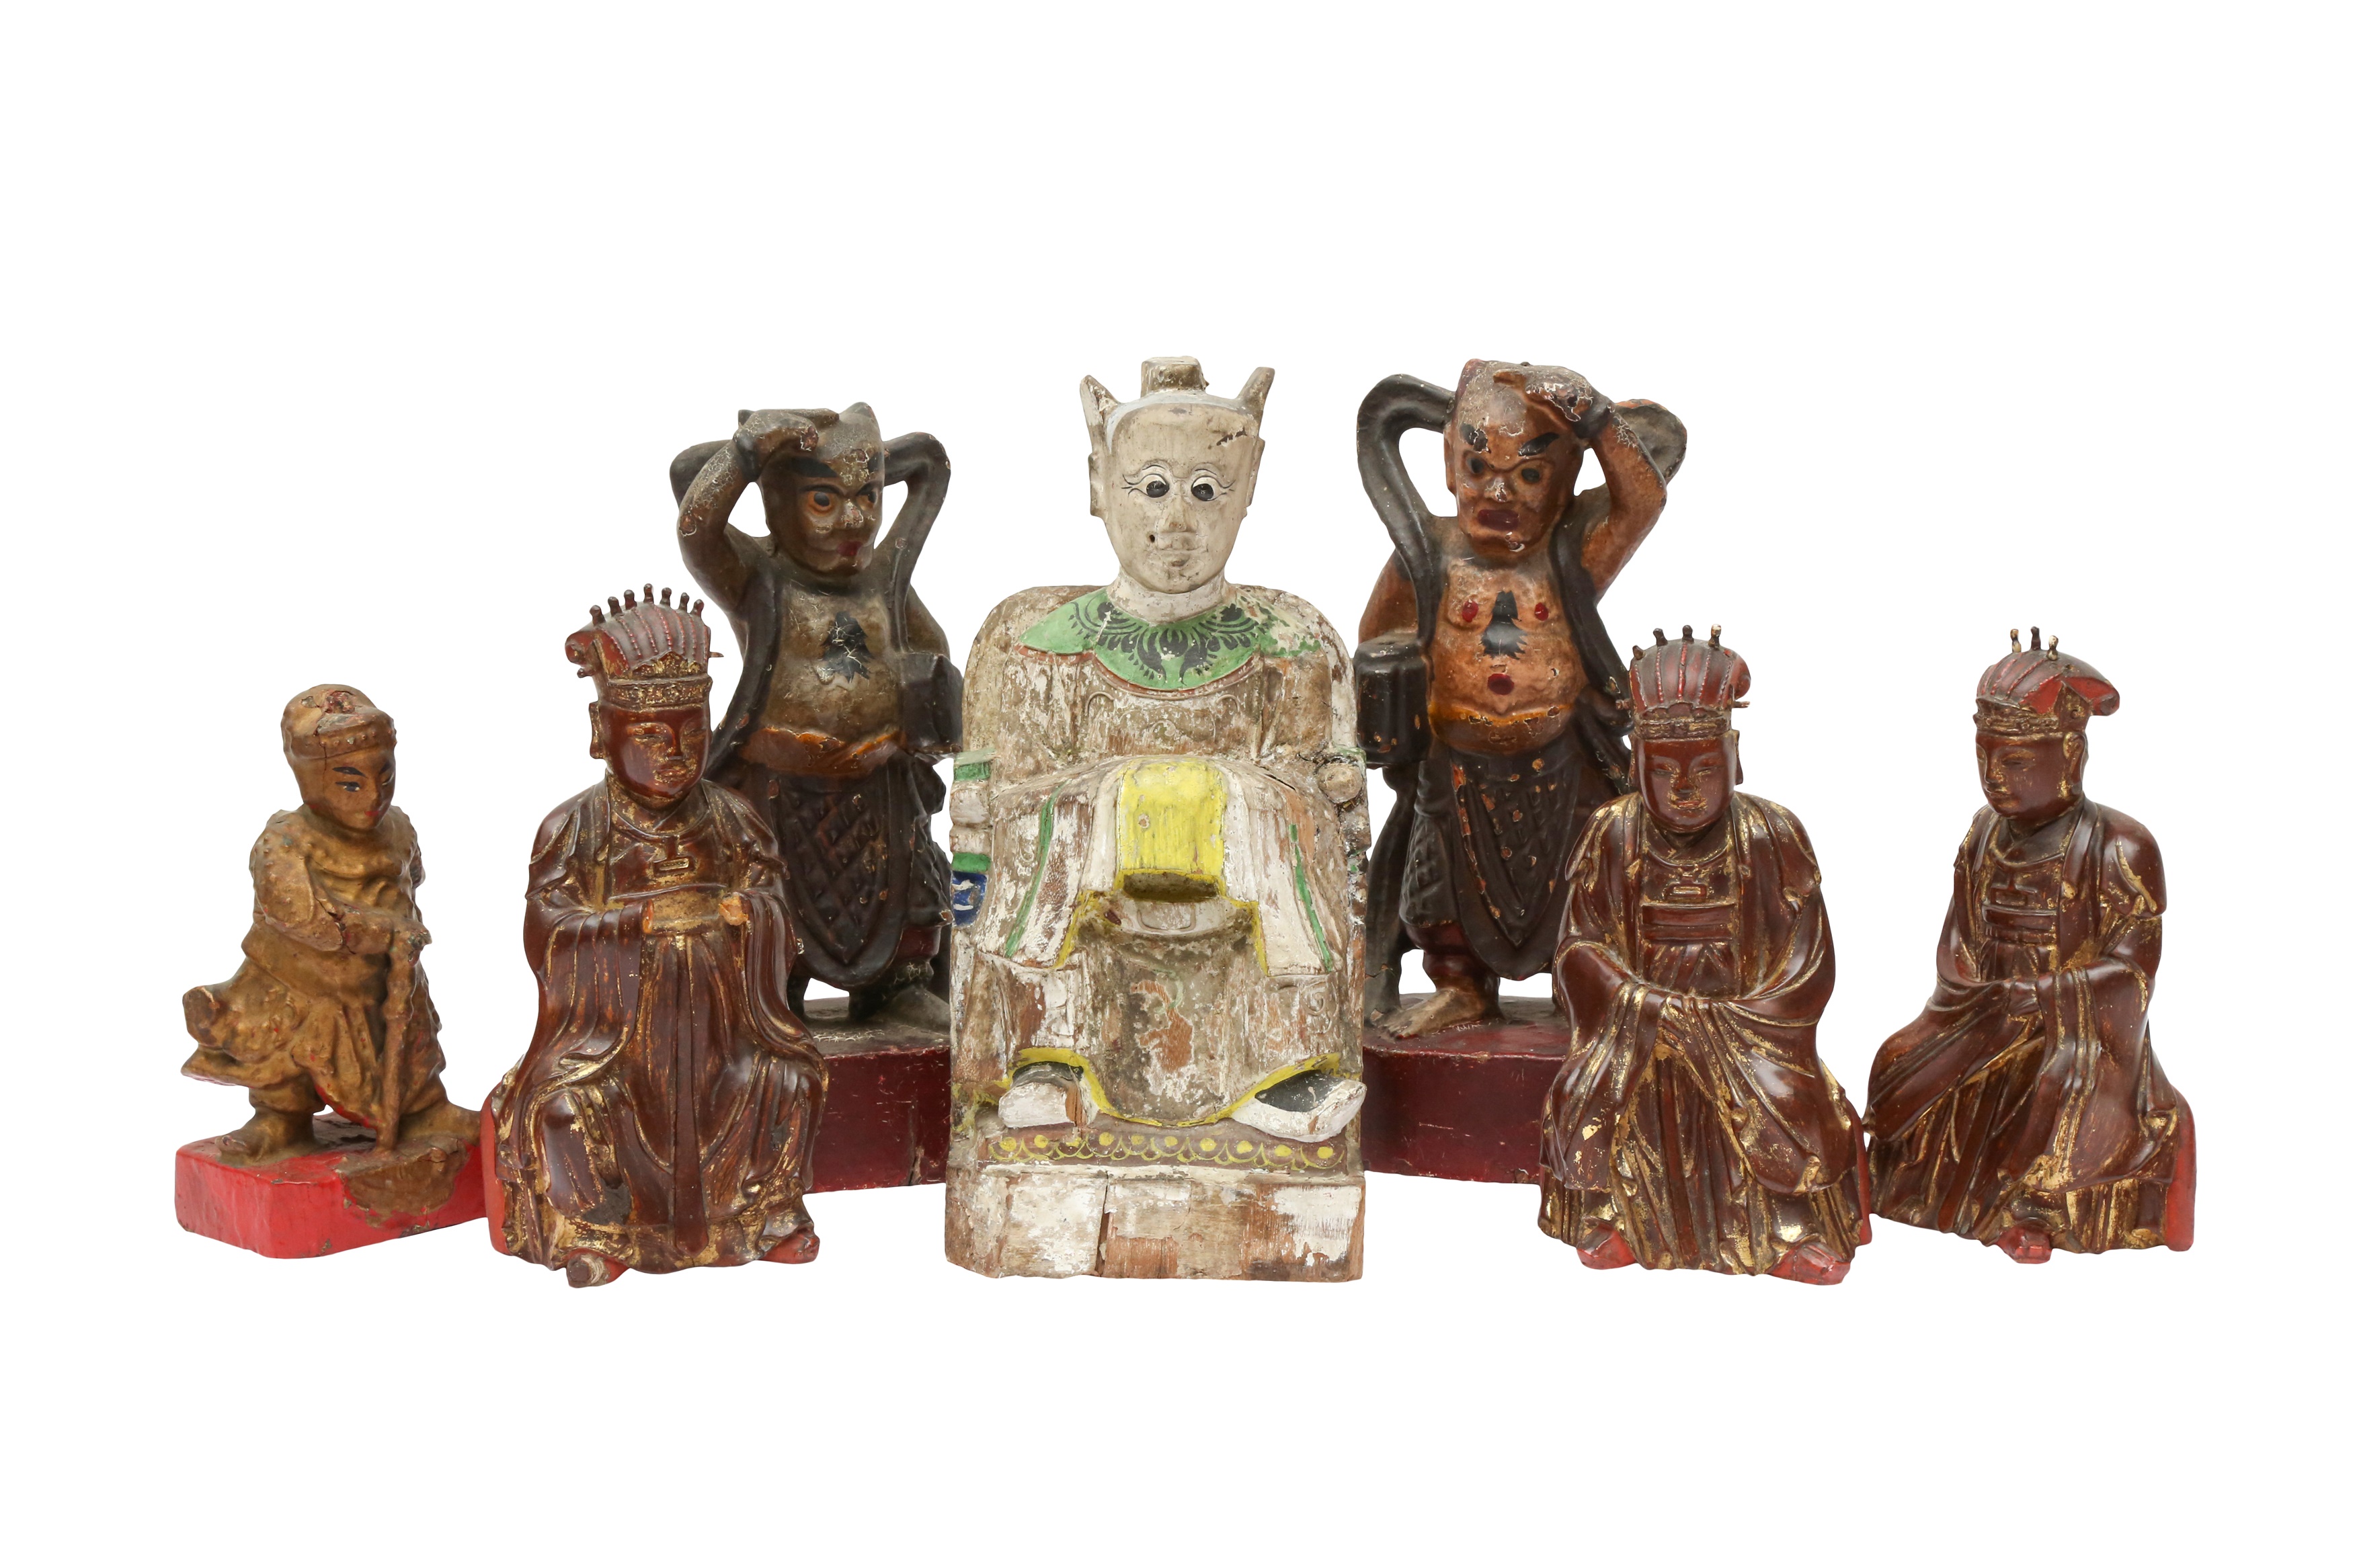 SEVEN CHINESE LACQUERED WOOD FIGURES 明或後期 漆木人物雕像七件